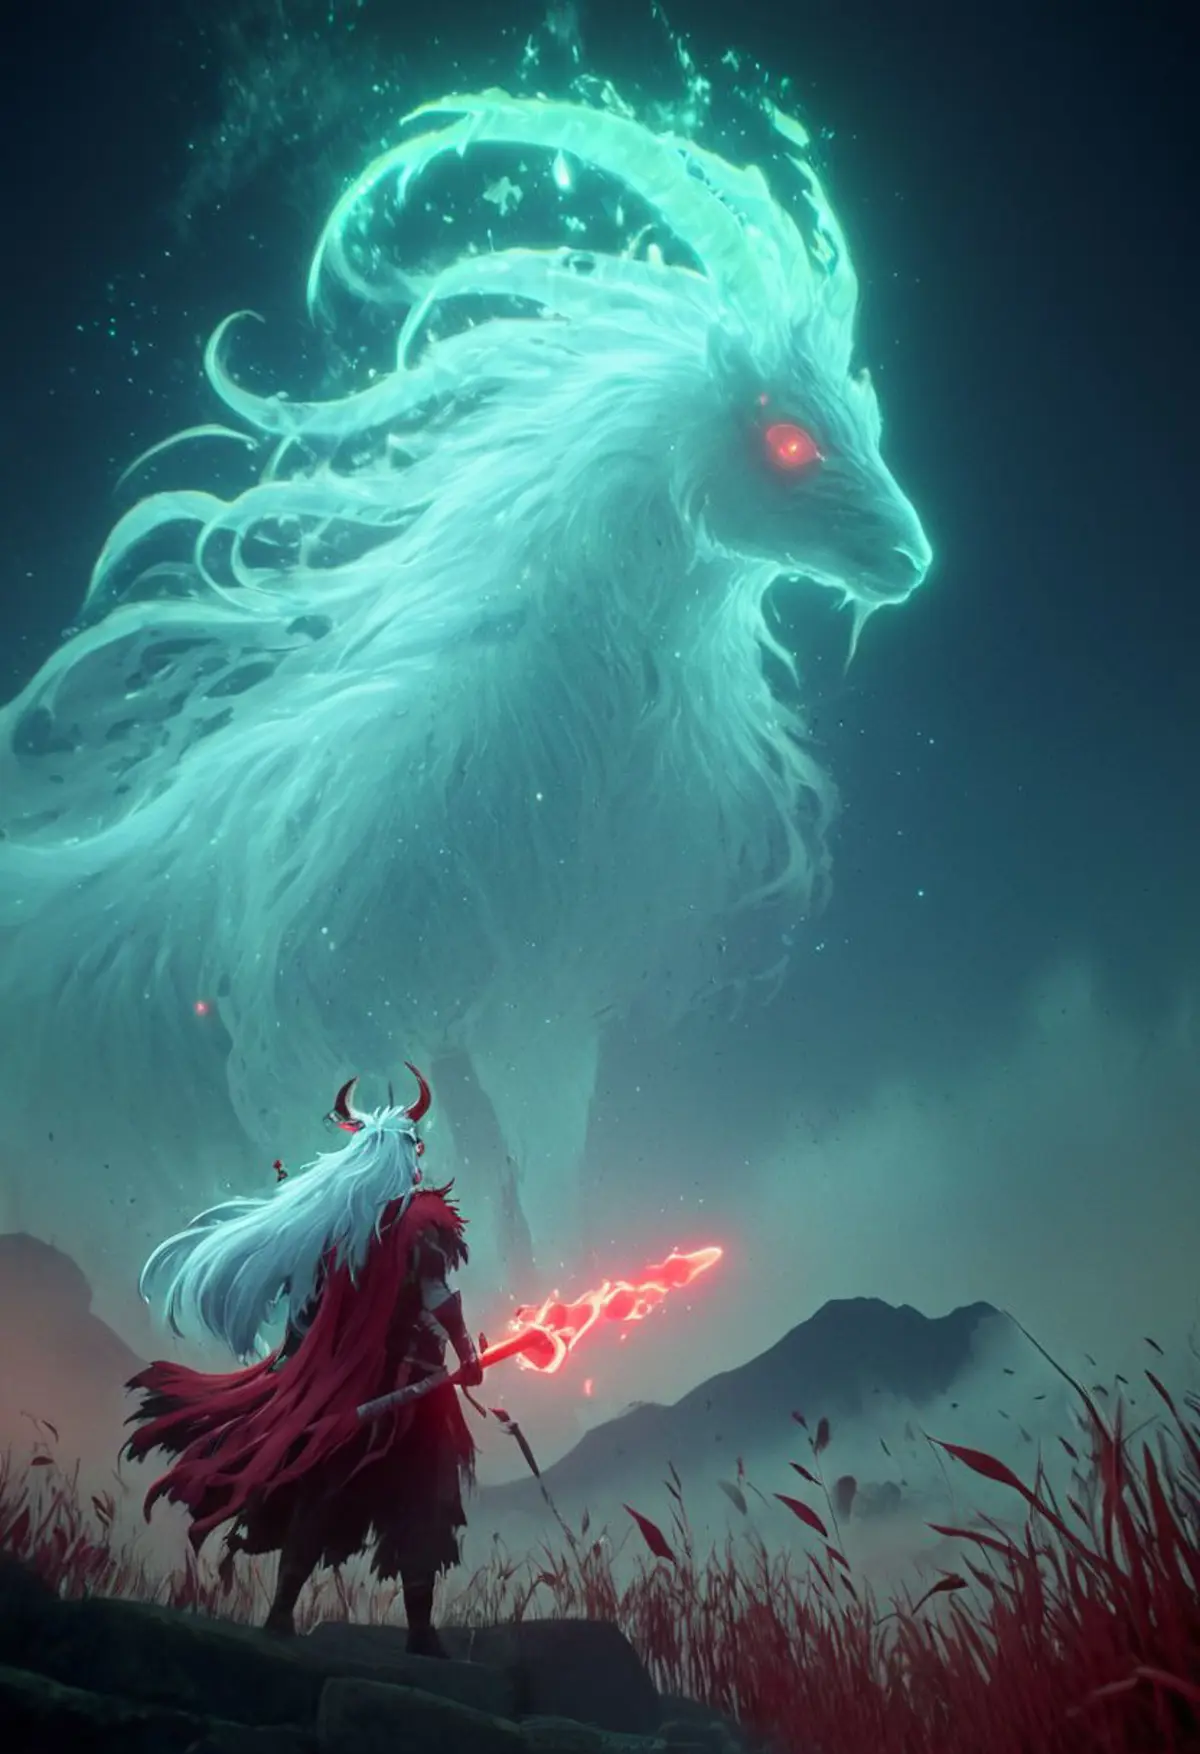 A silent confrontation between a figure clad in a red cloak and a towering, ethereal creature. The creature, resembling a goat with majestic, swirling horns, emits a soft glow, contrasting with its piercing red eyes that match the glowing red weapon held by the cloaked figure. The backdrop is of a night sky and silhouetted misty mountains, with tall grasses gently swaying in the foreground. 